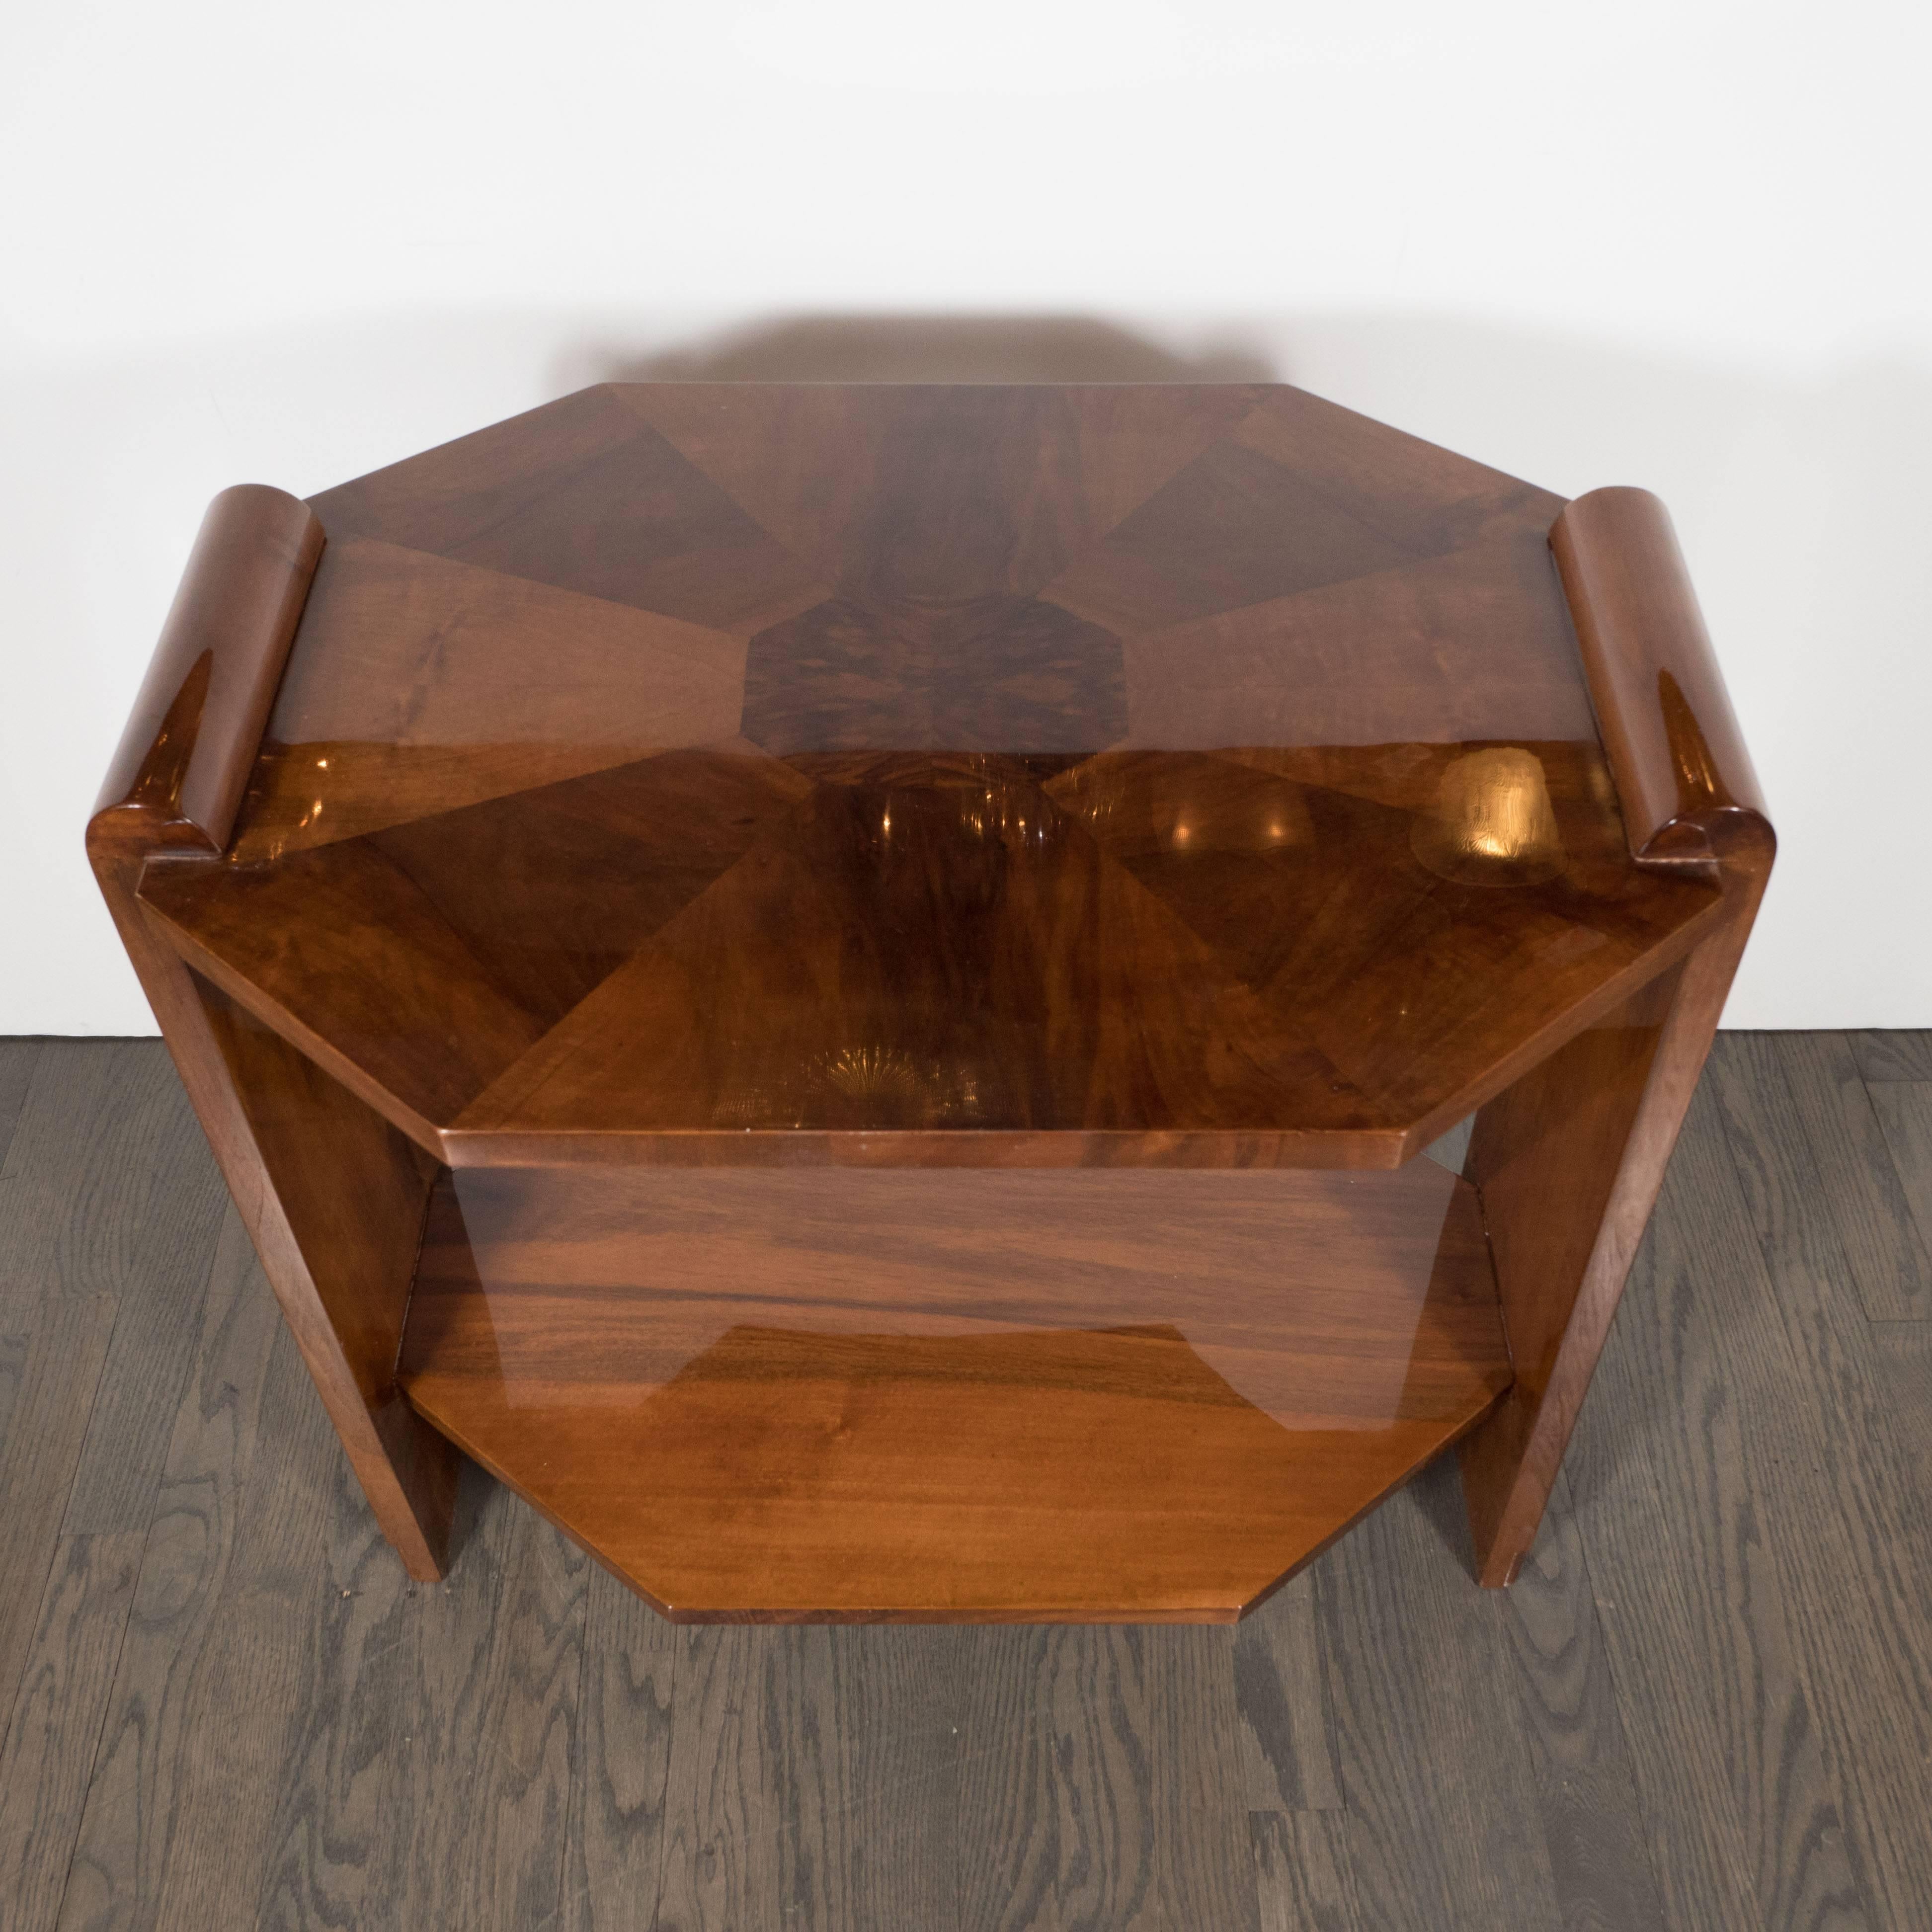 Polished Elegant Art Deco Octagonal Side Occasional Table in Exotic Book-Matched Walnut